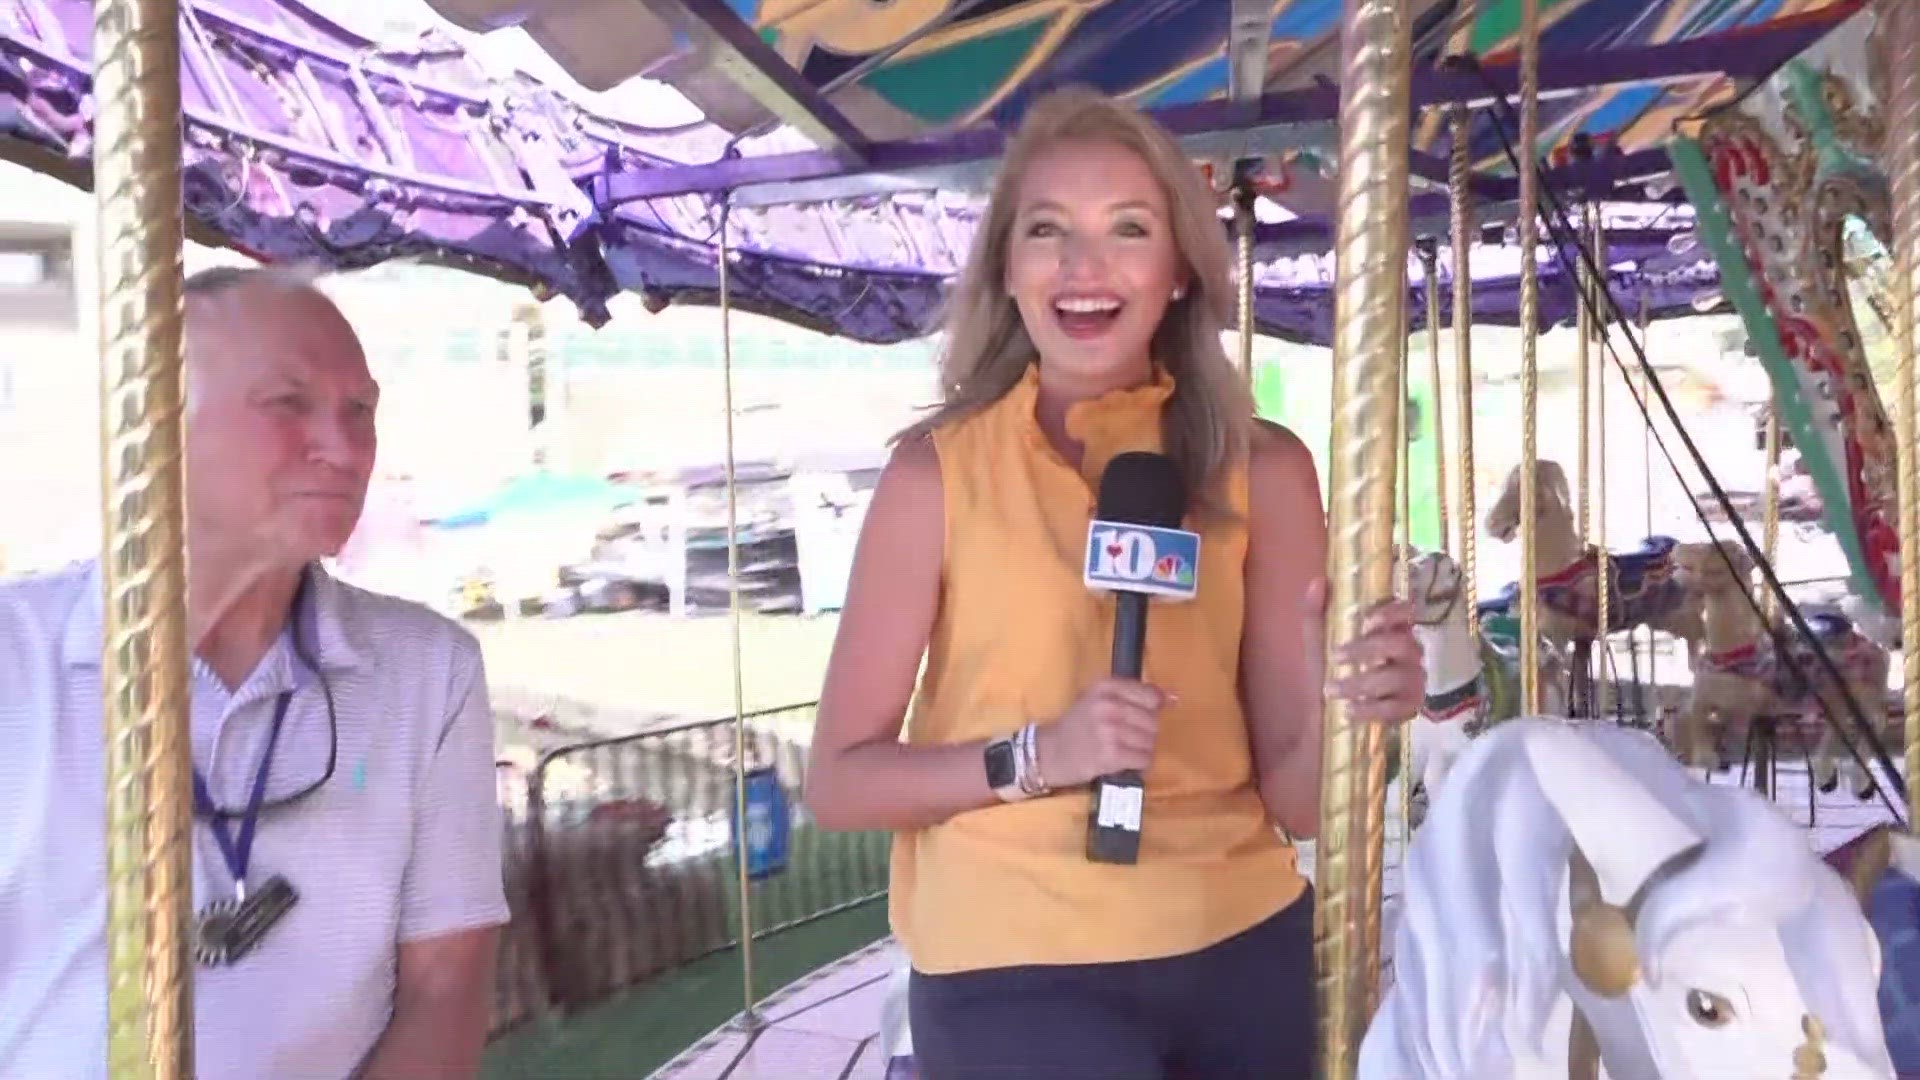 10News' Katie Inman hitches a ride on the carousel before the fair ends for the year.